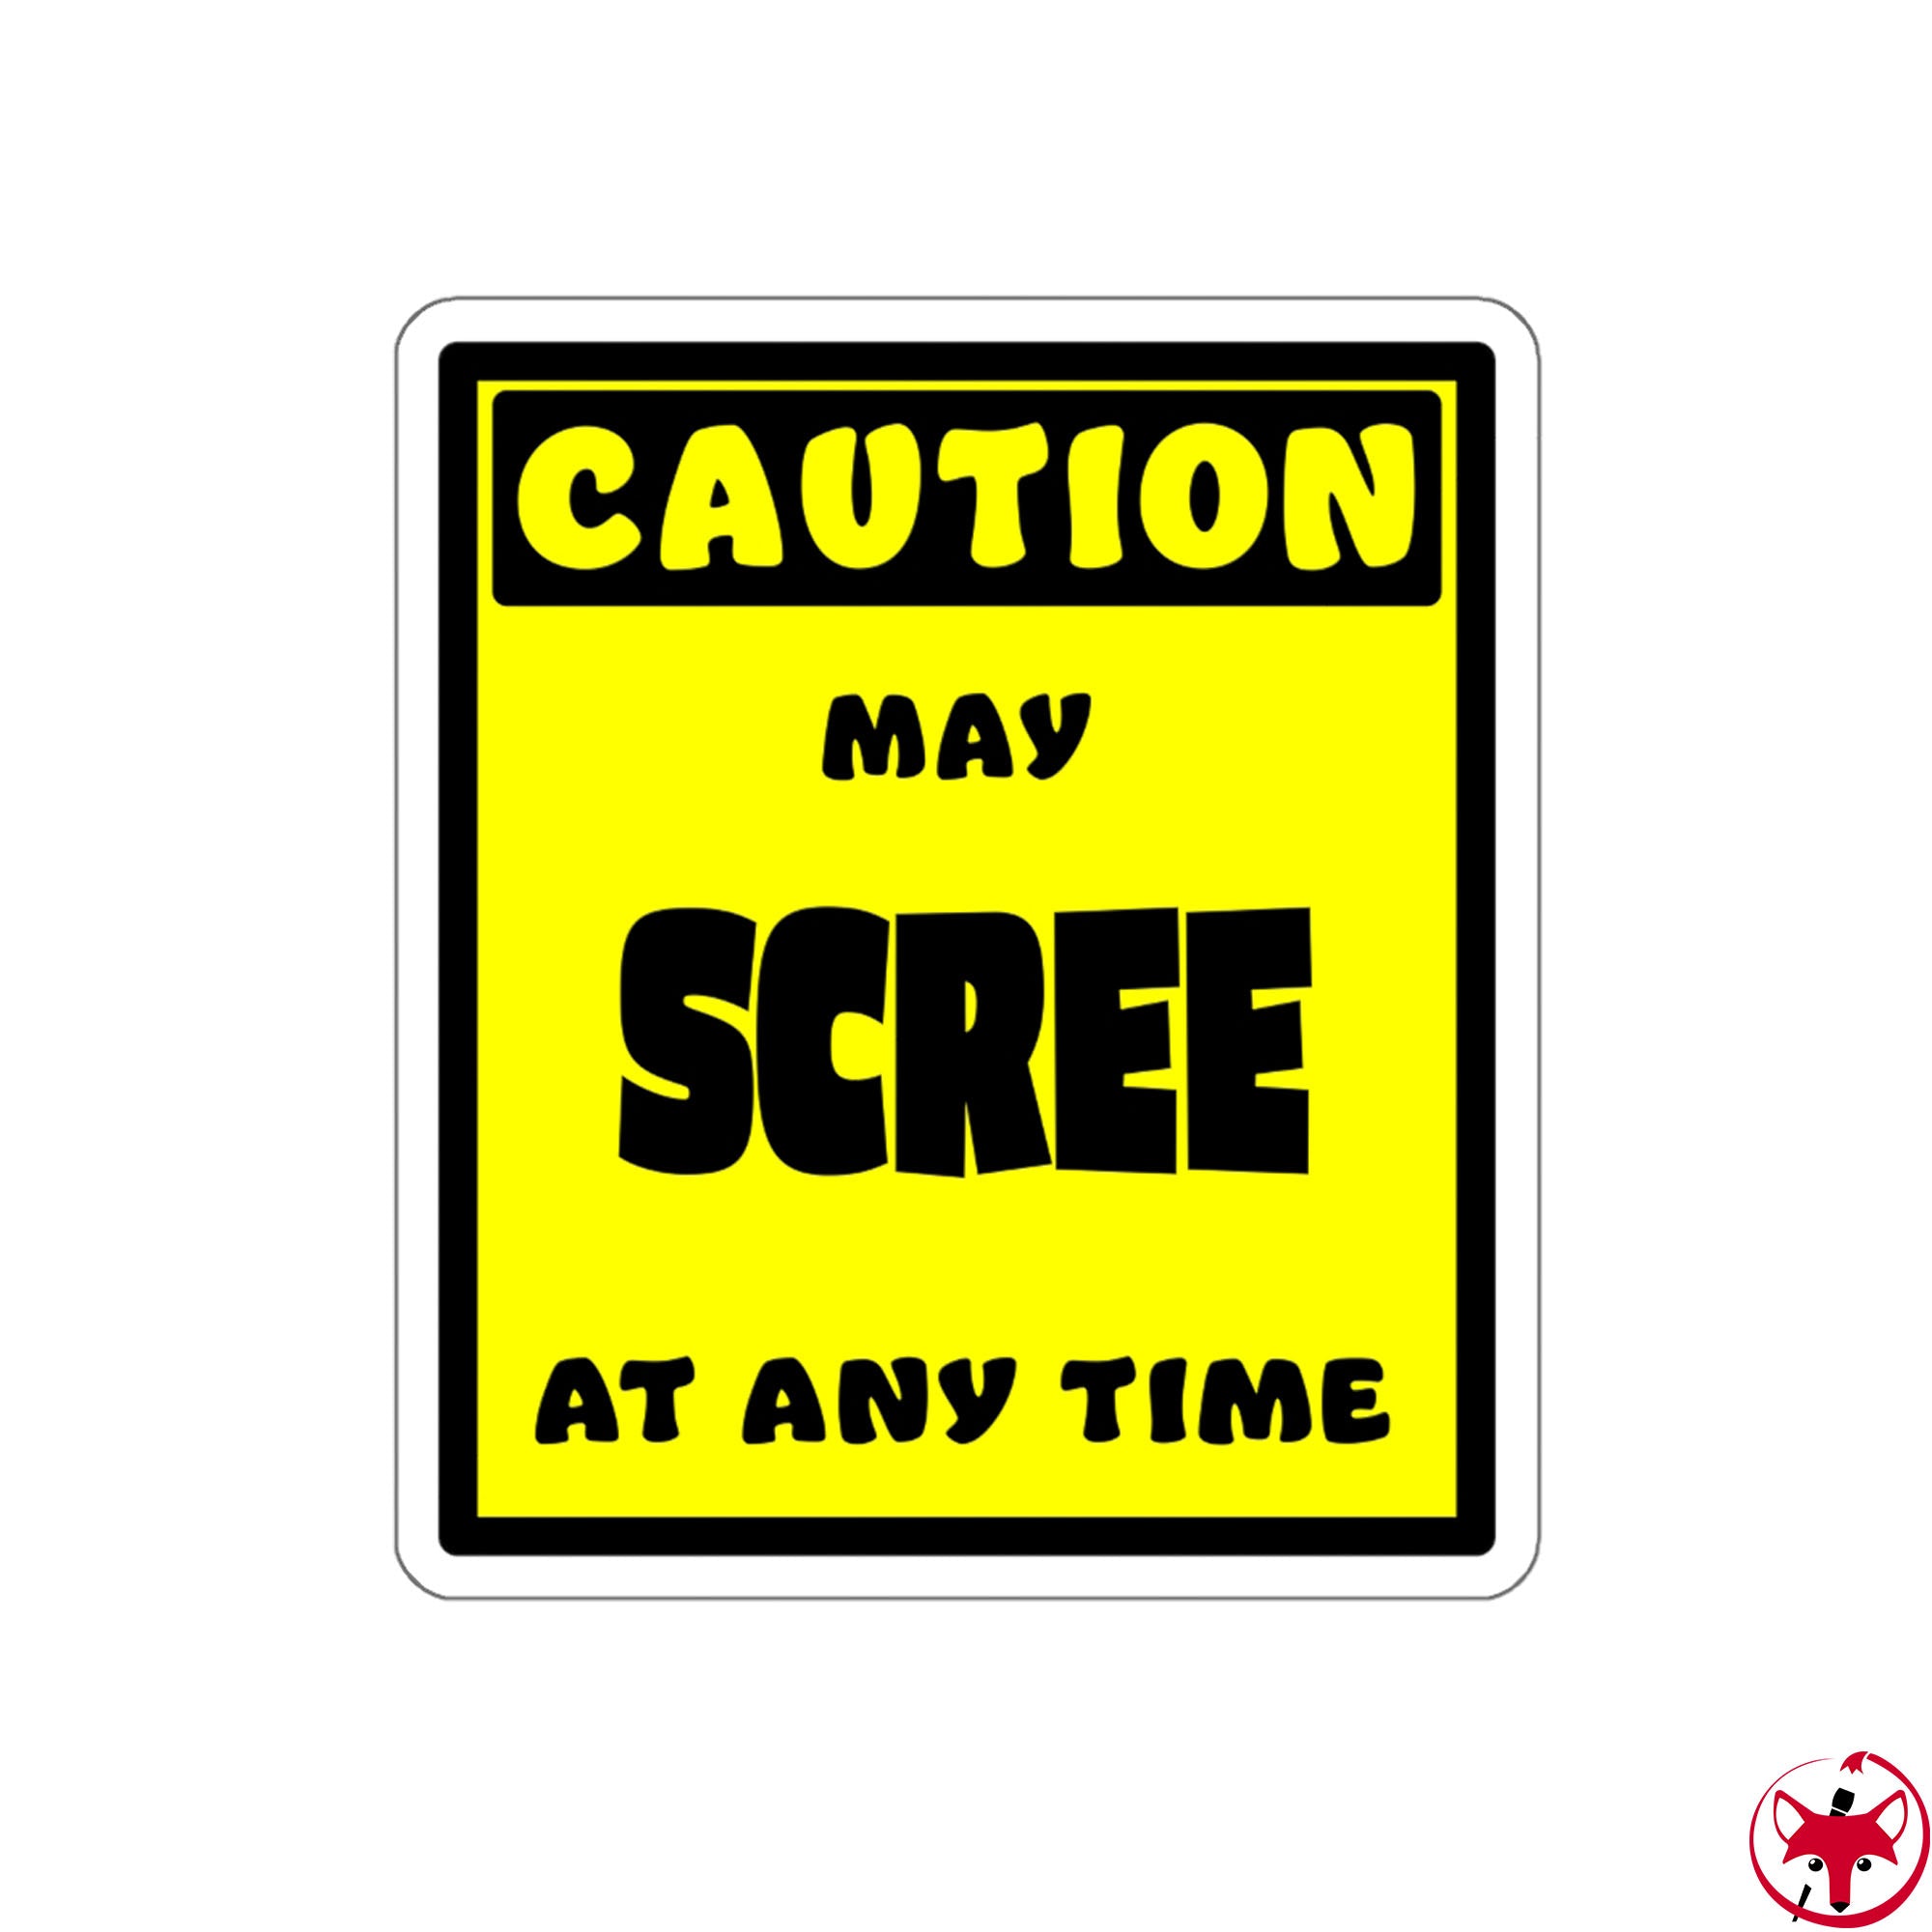 CAUTION! May SCREE at any time! - Sticker Sticker AFLT-Whootorca 